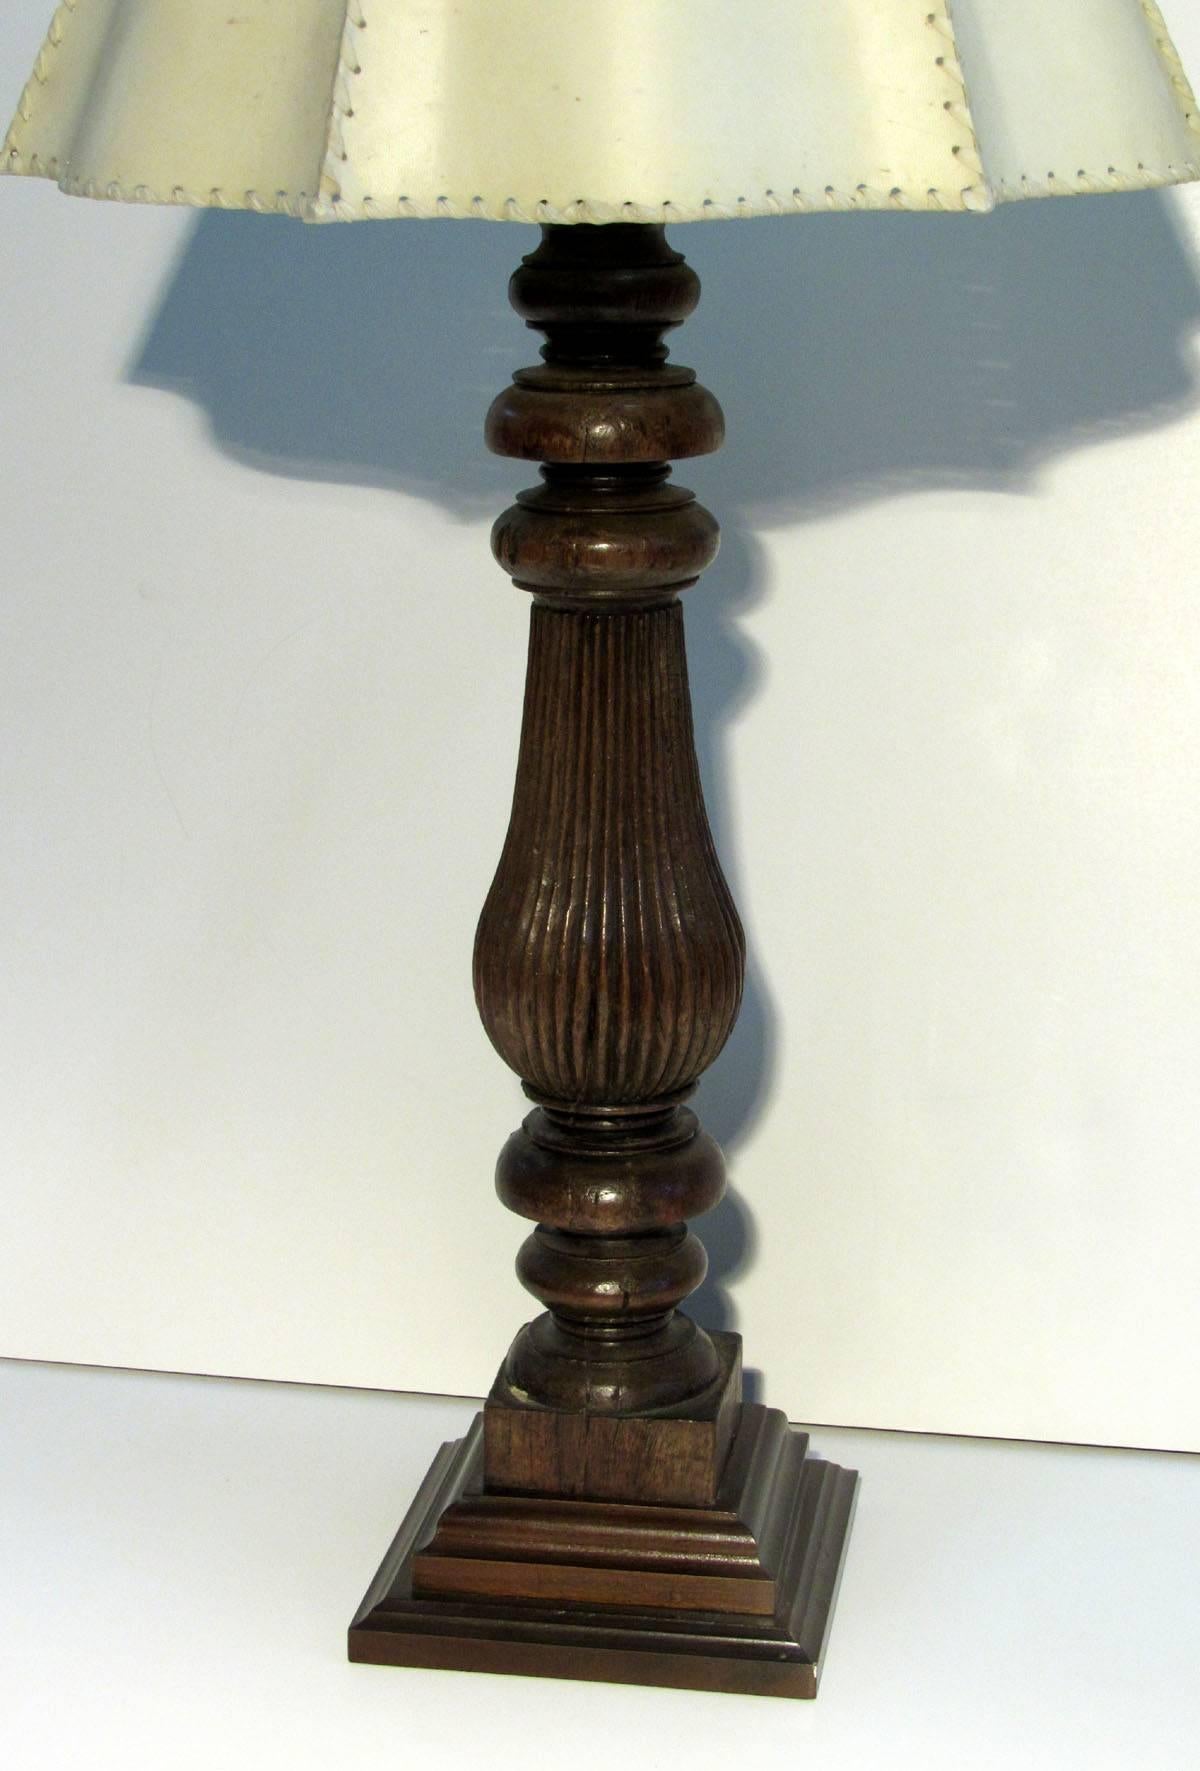 Late 19th century carved and turned legs from India, now as lamps with new bases.